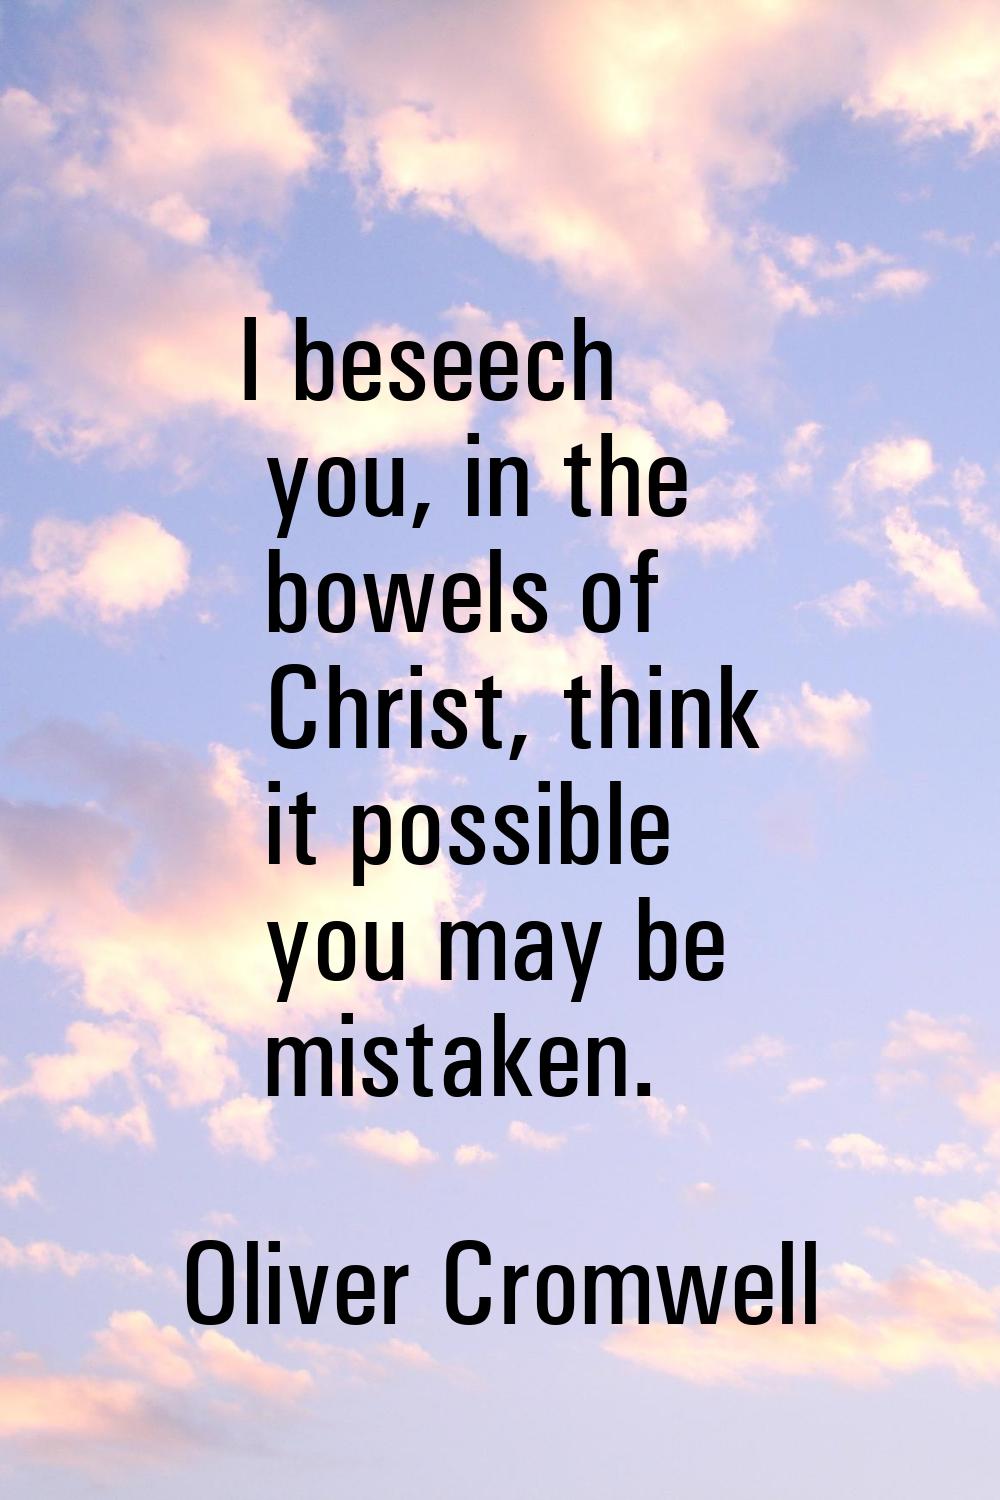 I beseech you, in the bowels of Christ, think it possible you may be mistaken.